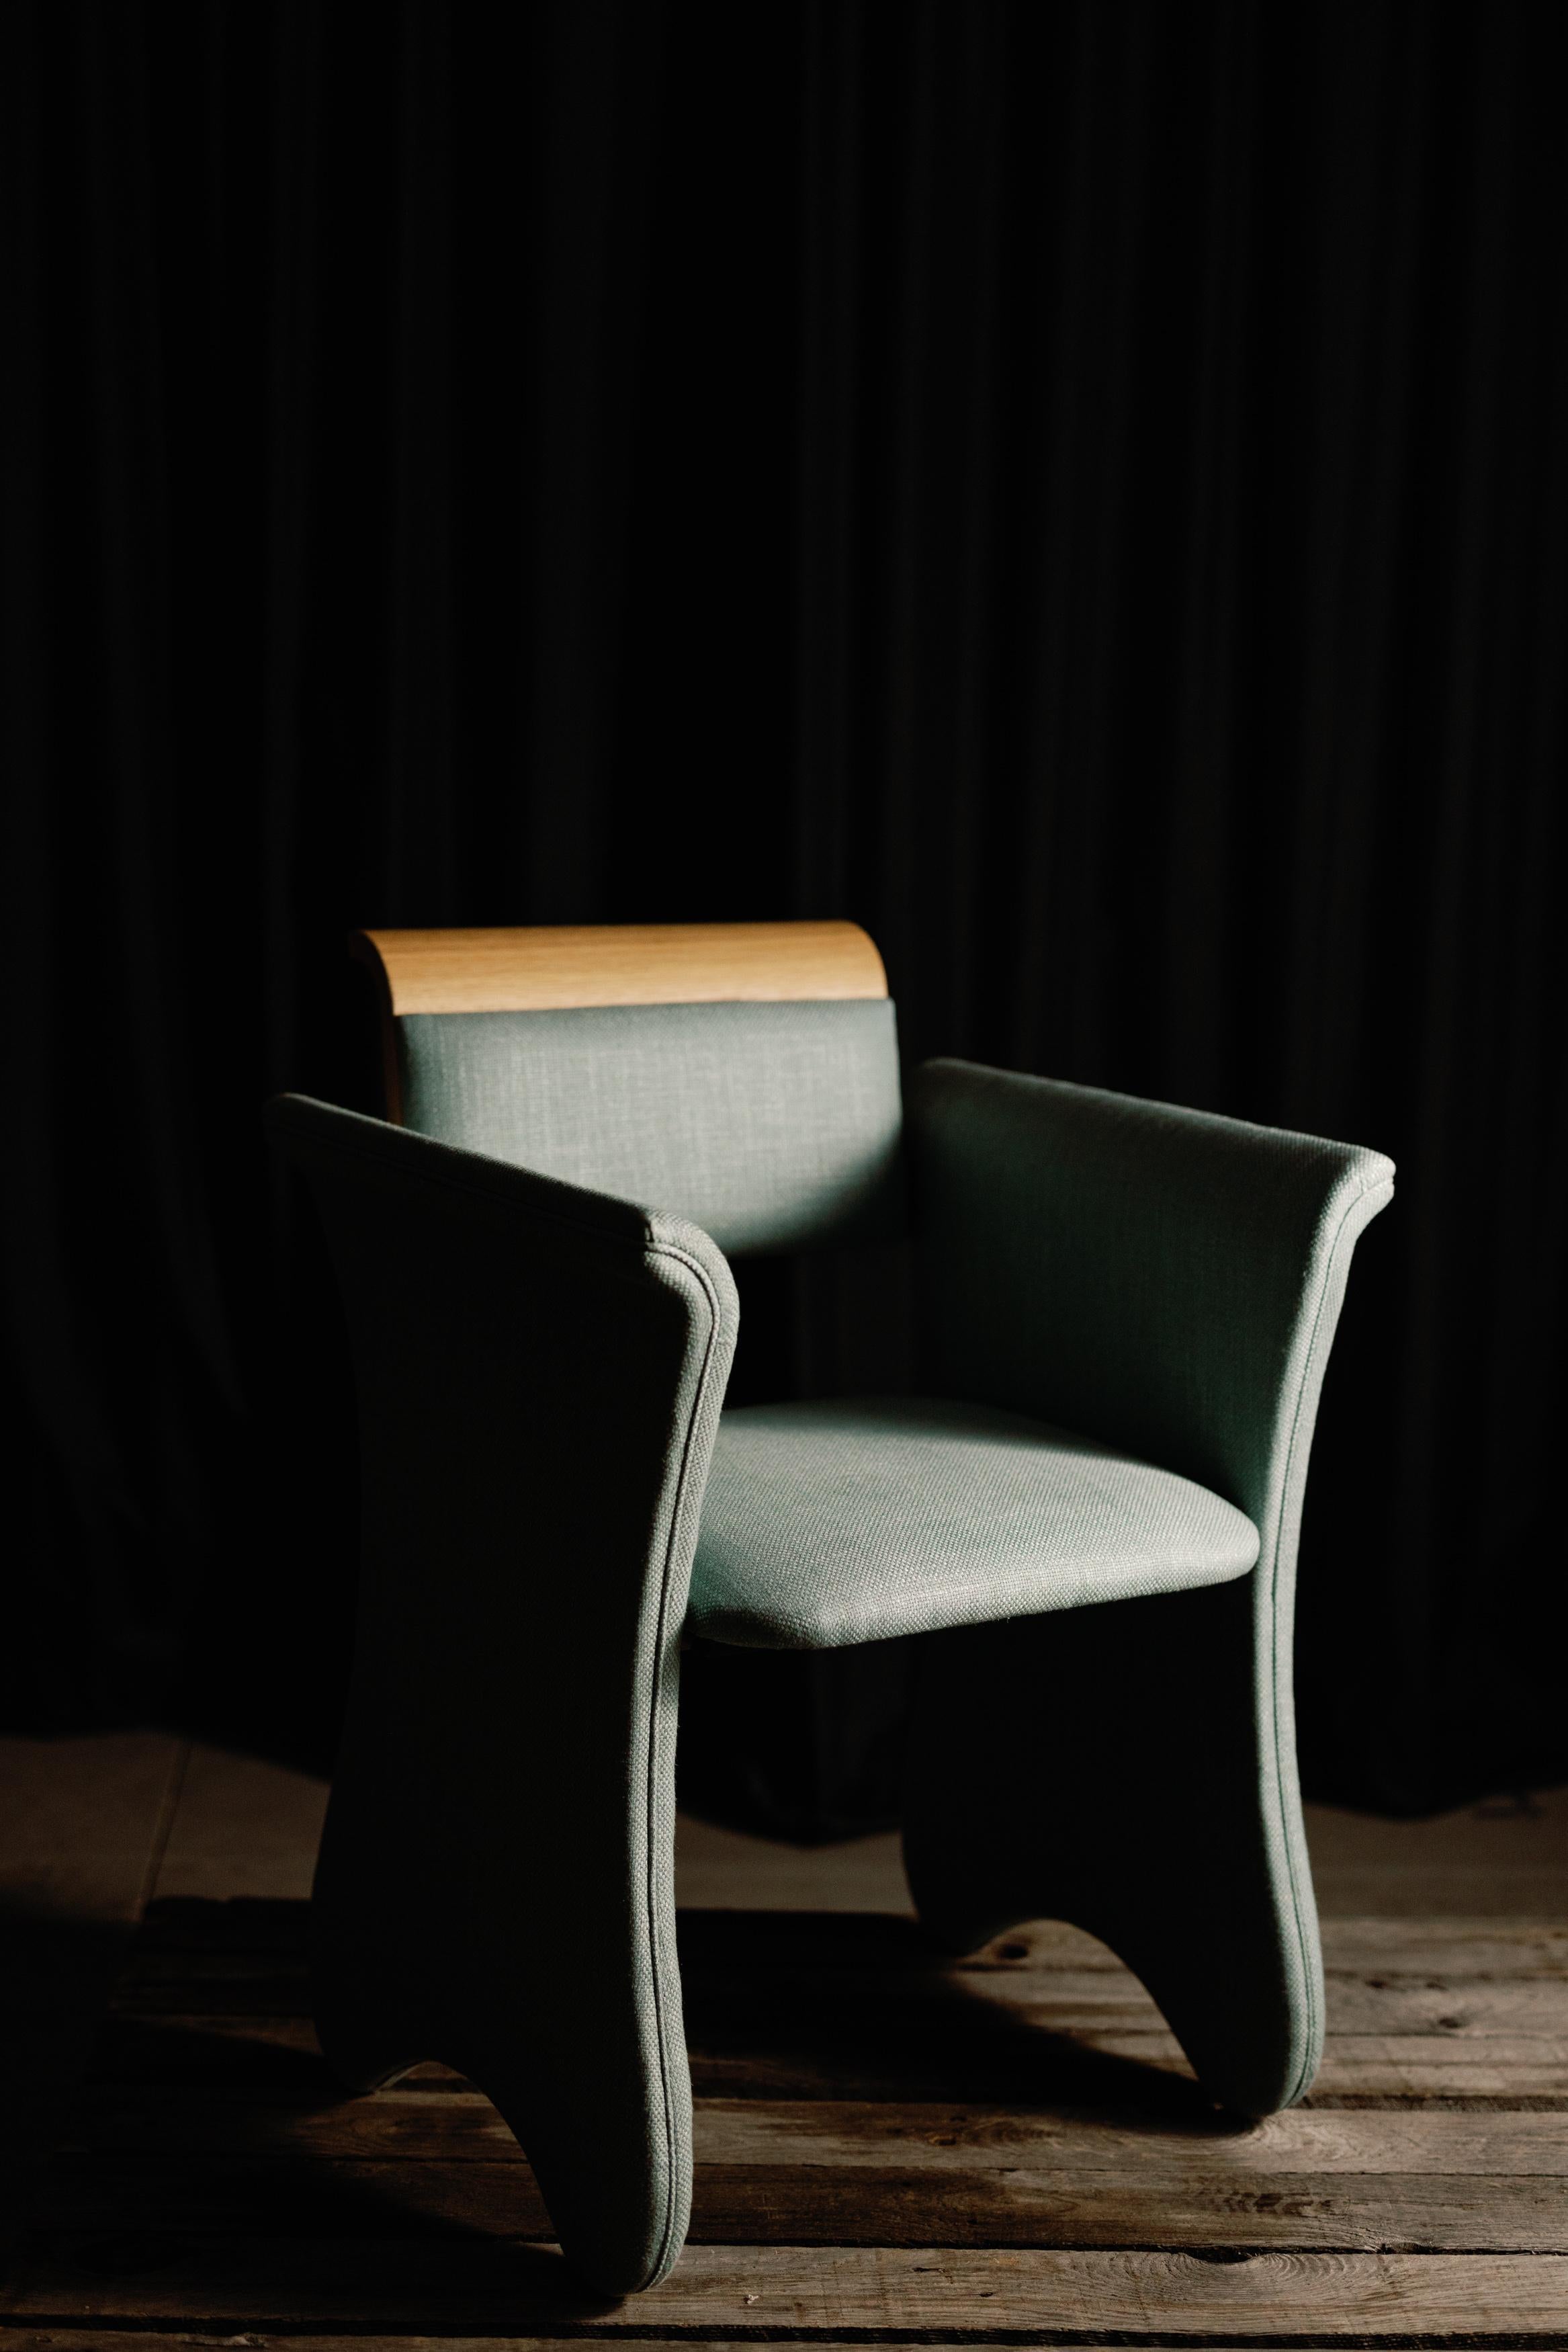 Timeless Chair, Contemporary Collection, Handcrafted in Portugal - Europe by Greenapple.

The Timeless modern office chair was designed and crafted to endure the passage of time, serving as a companion through a lifetime of growth and experiences.